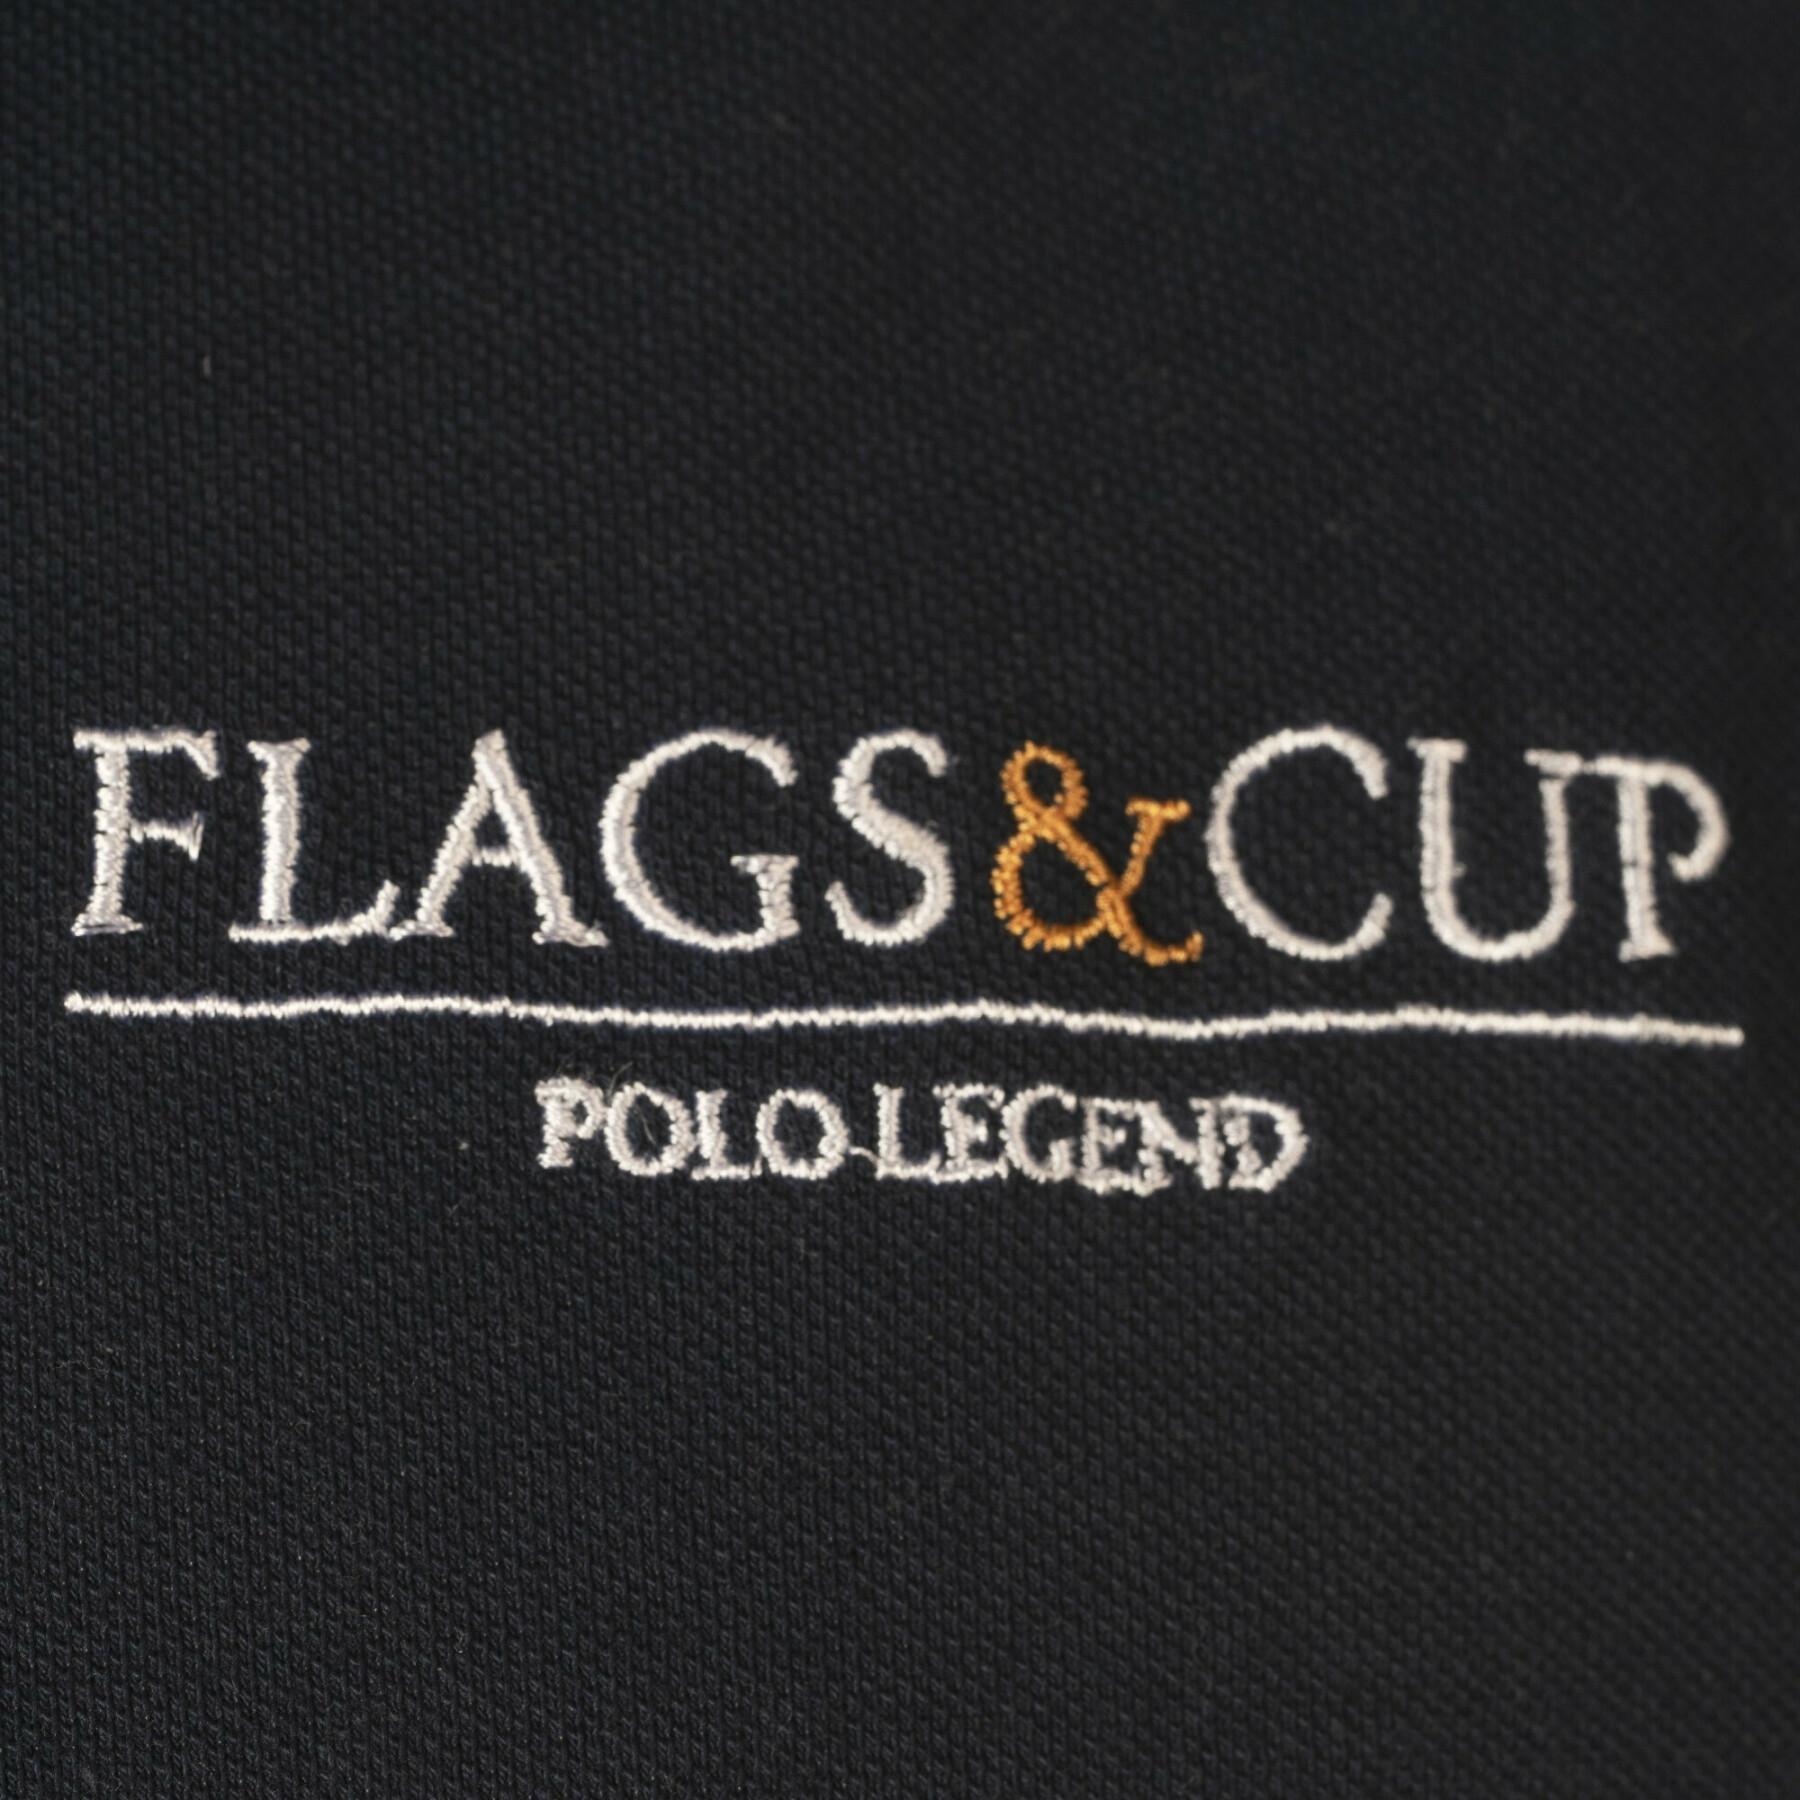 Paardrijpolo Flags&Cup Pico